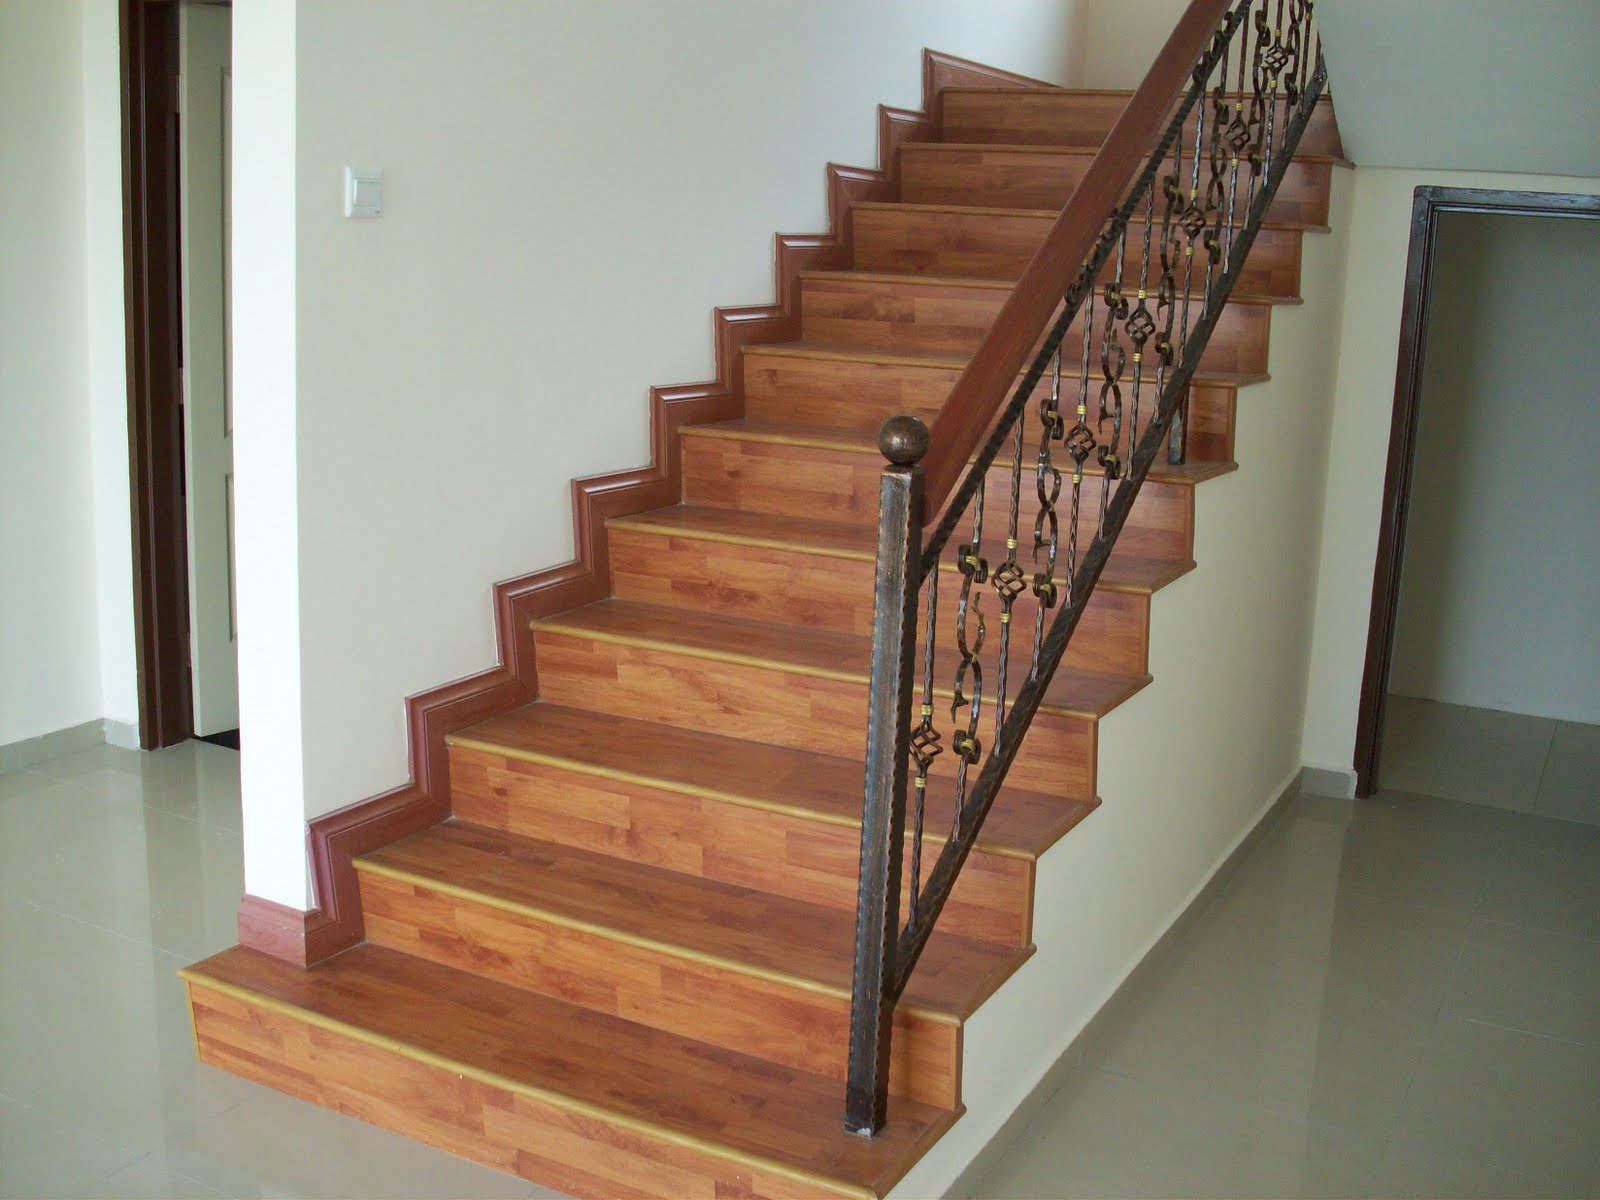 How To Install Wood Flooring On Stairs, Can I Put Hardwood Flooring On Stairs